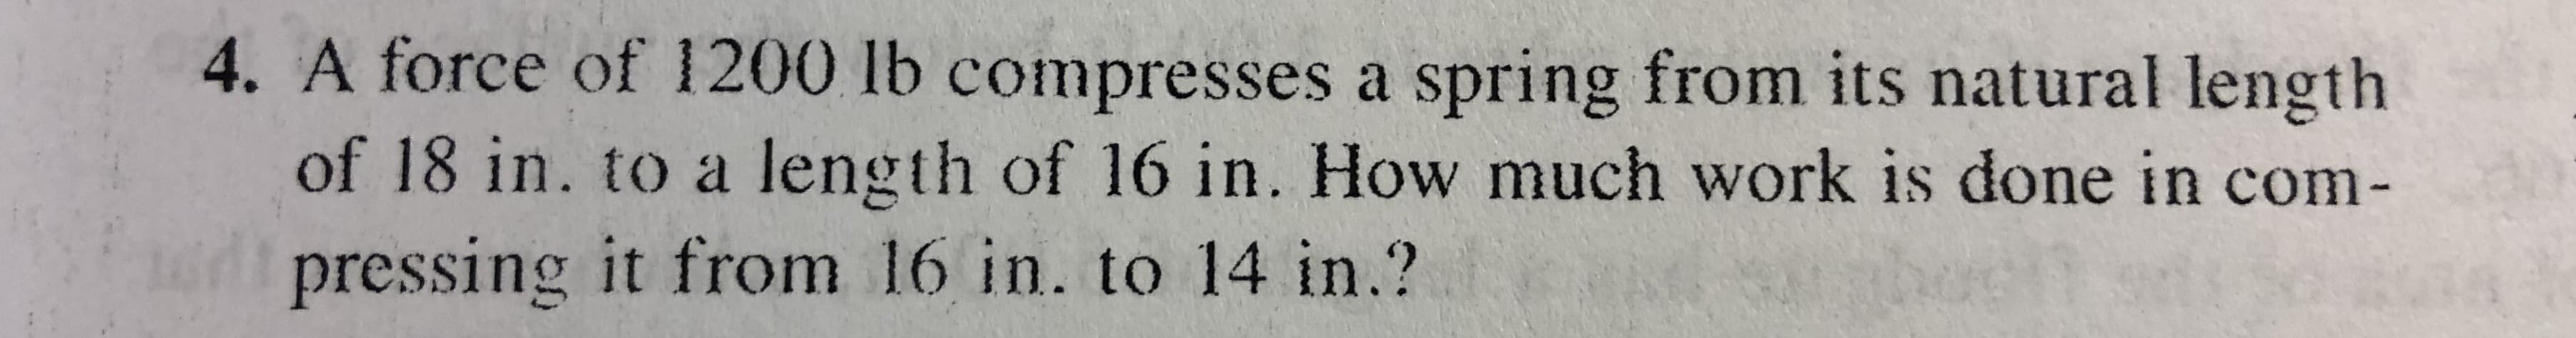 4. A force of 1200 lb compresses a spring from its natural length
of 18 in. to a length of 16 in. How much work is done in com-
pressing it from 16 in. to 14 in.?
